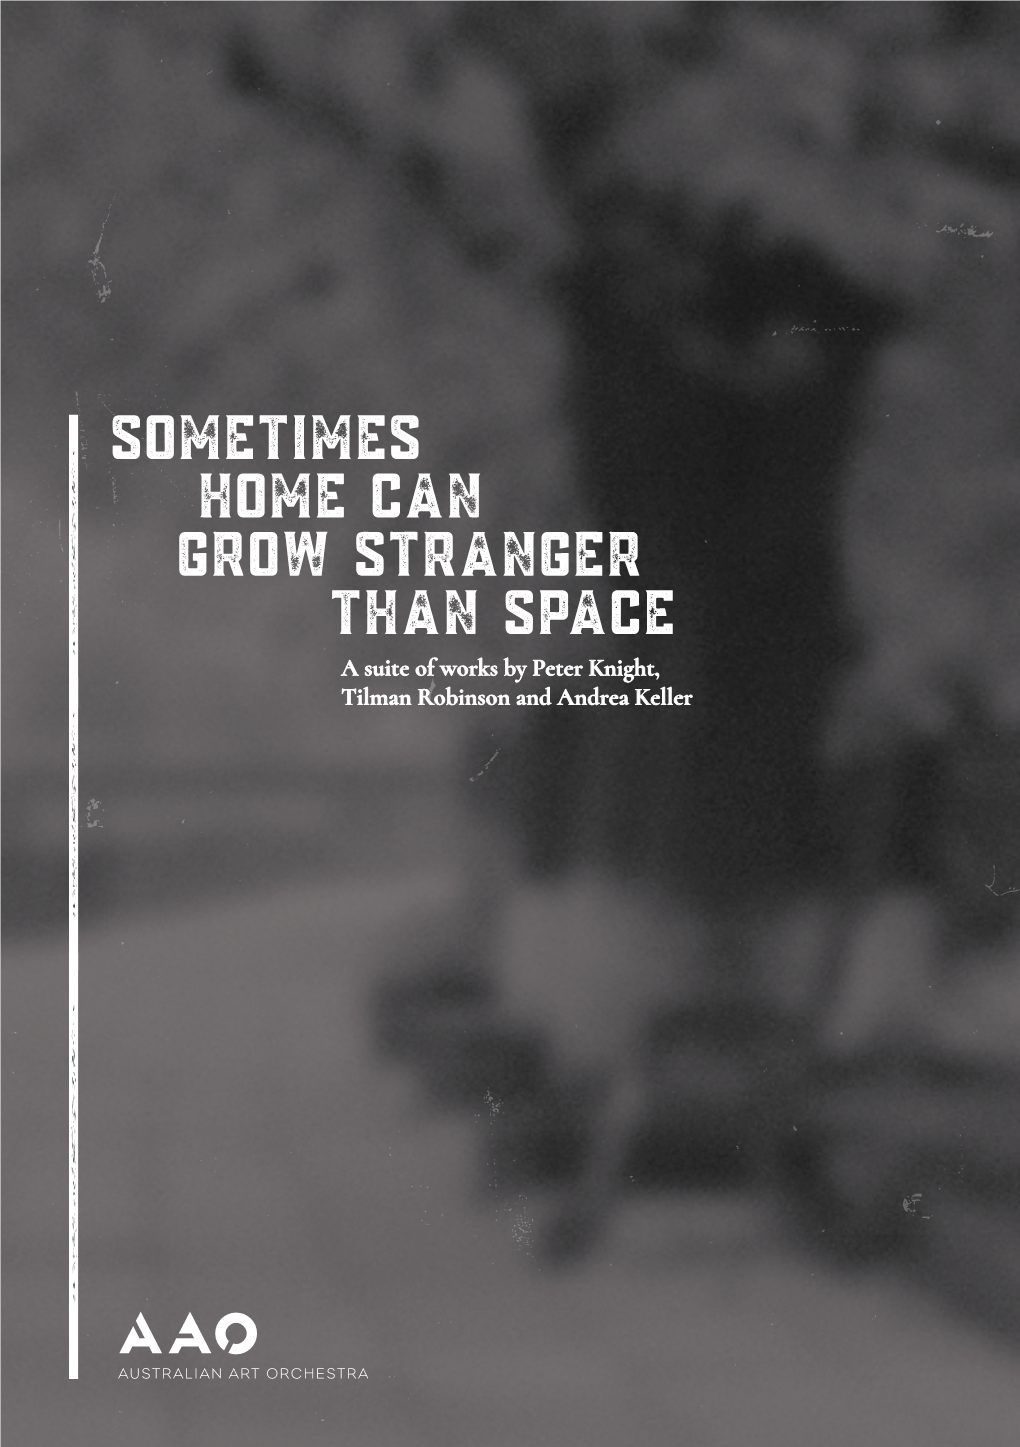 Sometimes Home Can Grow Stranger Than Space